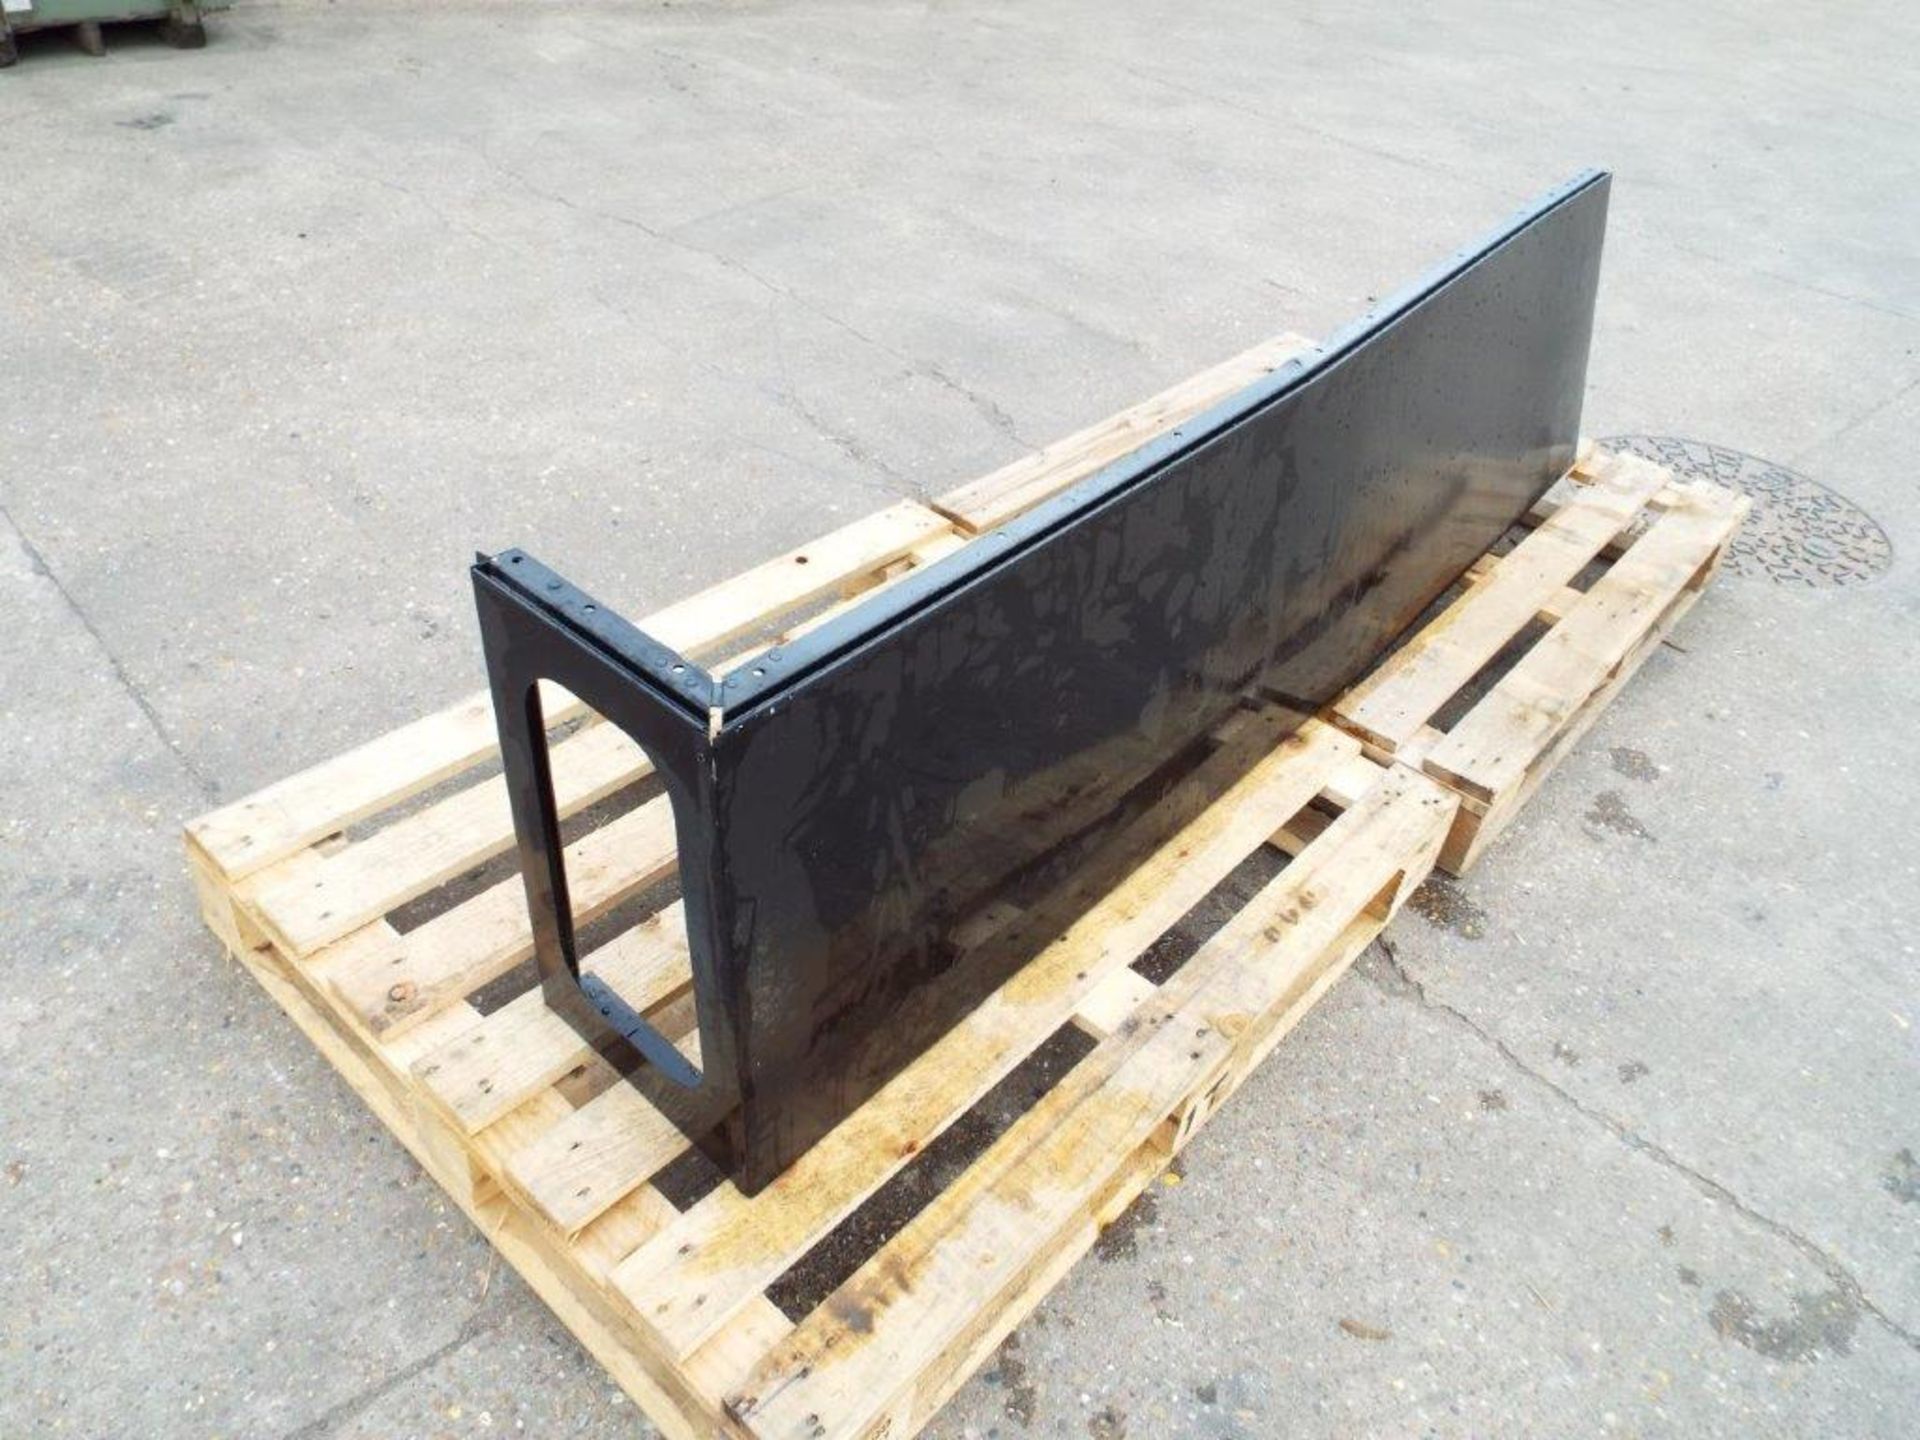 2 x Land Rover Defender 110 Rear Body Panels - Image 6 of 10